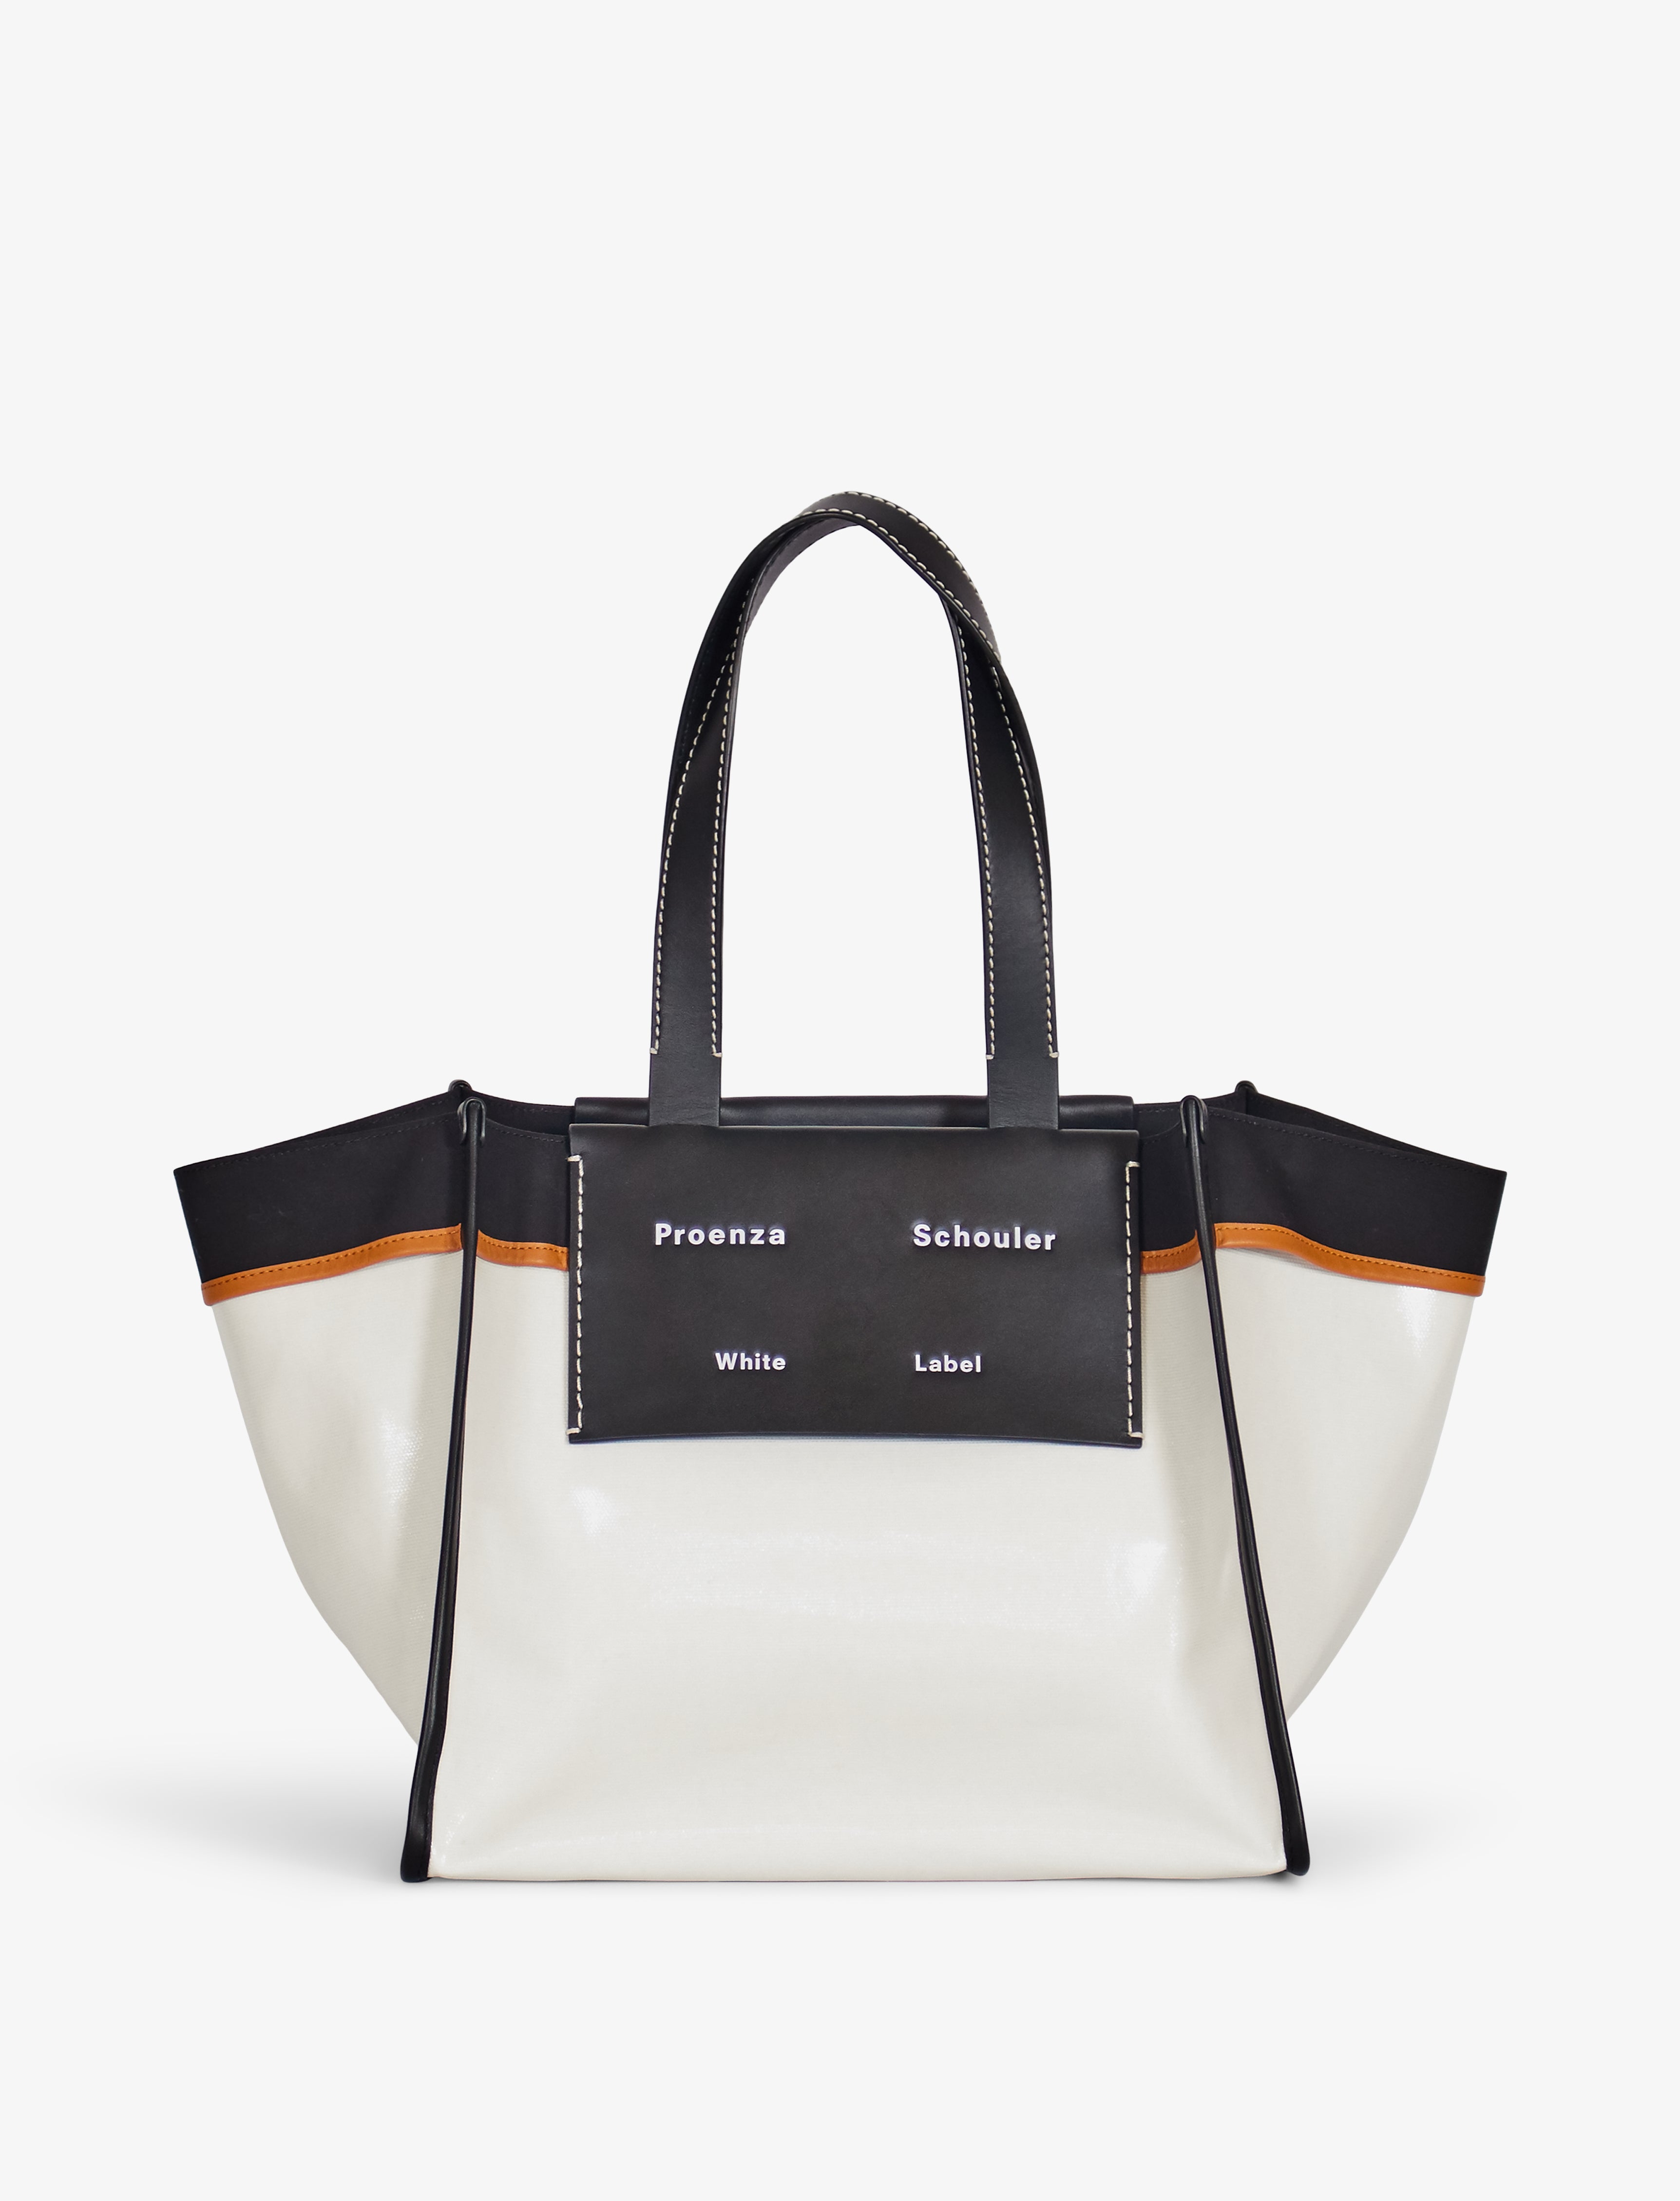 Private label bags: Italian manufacturers and artisans of handbags for your  brand